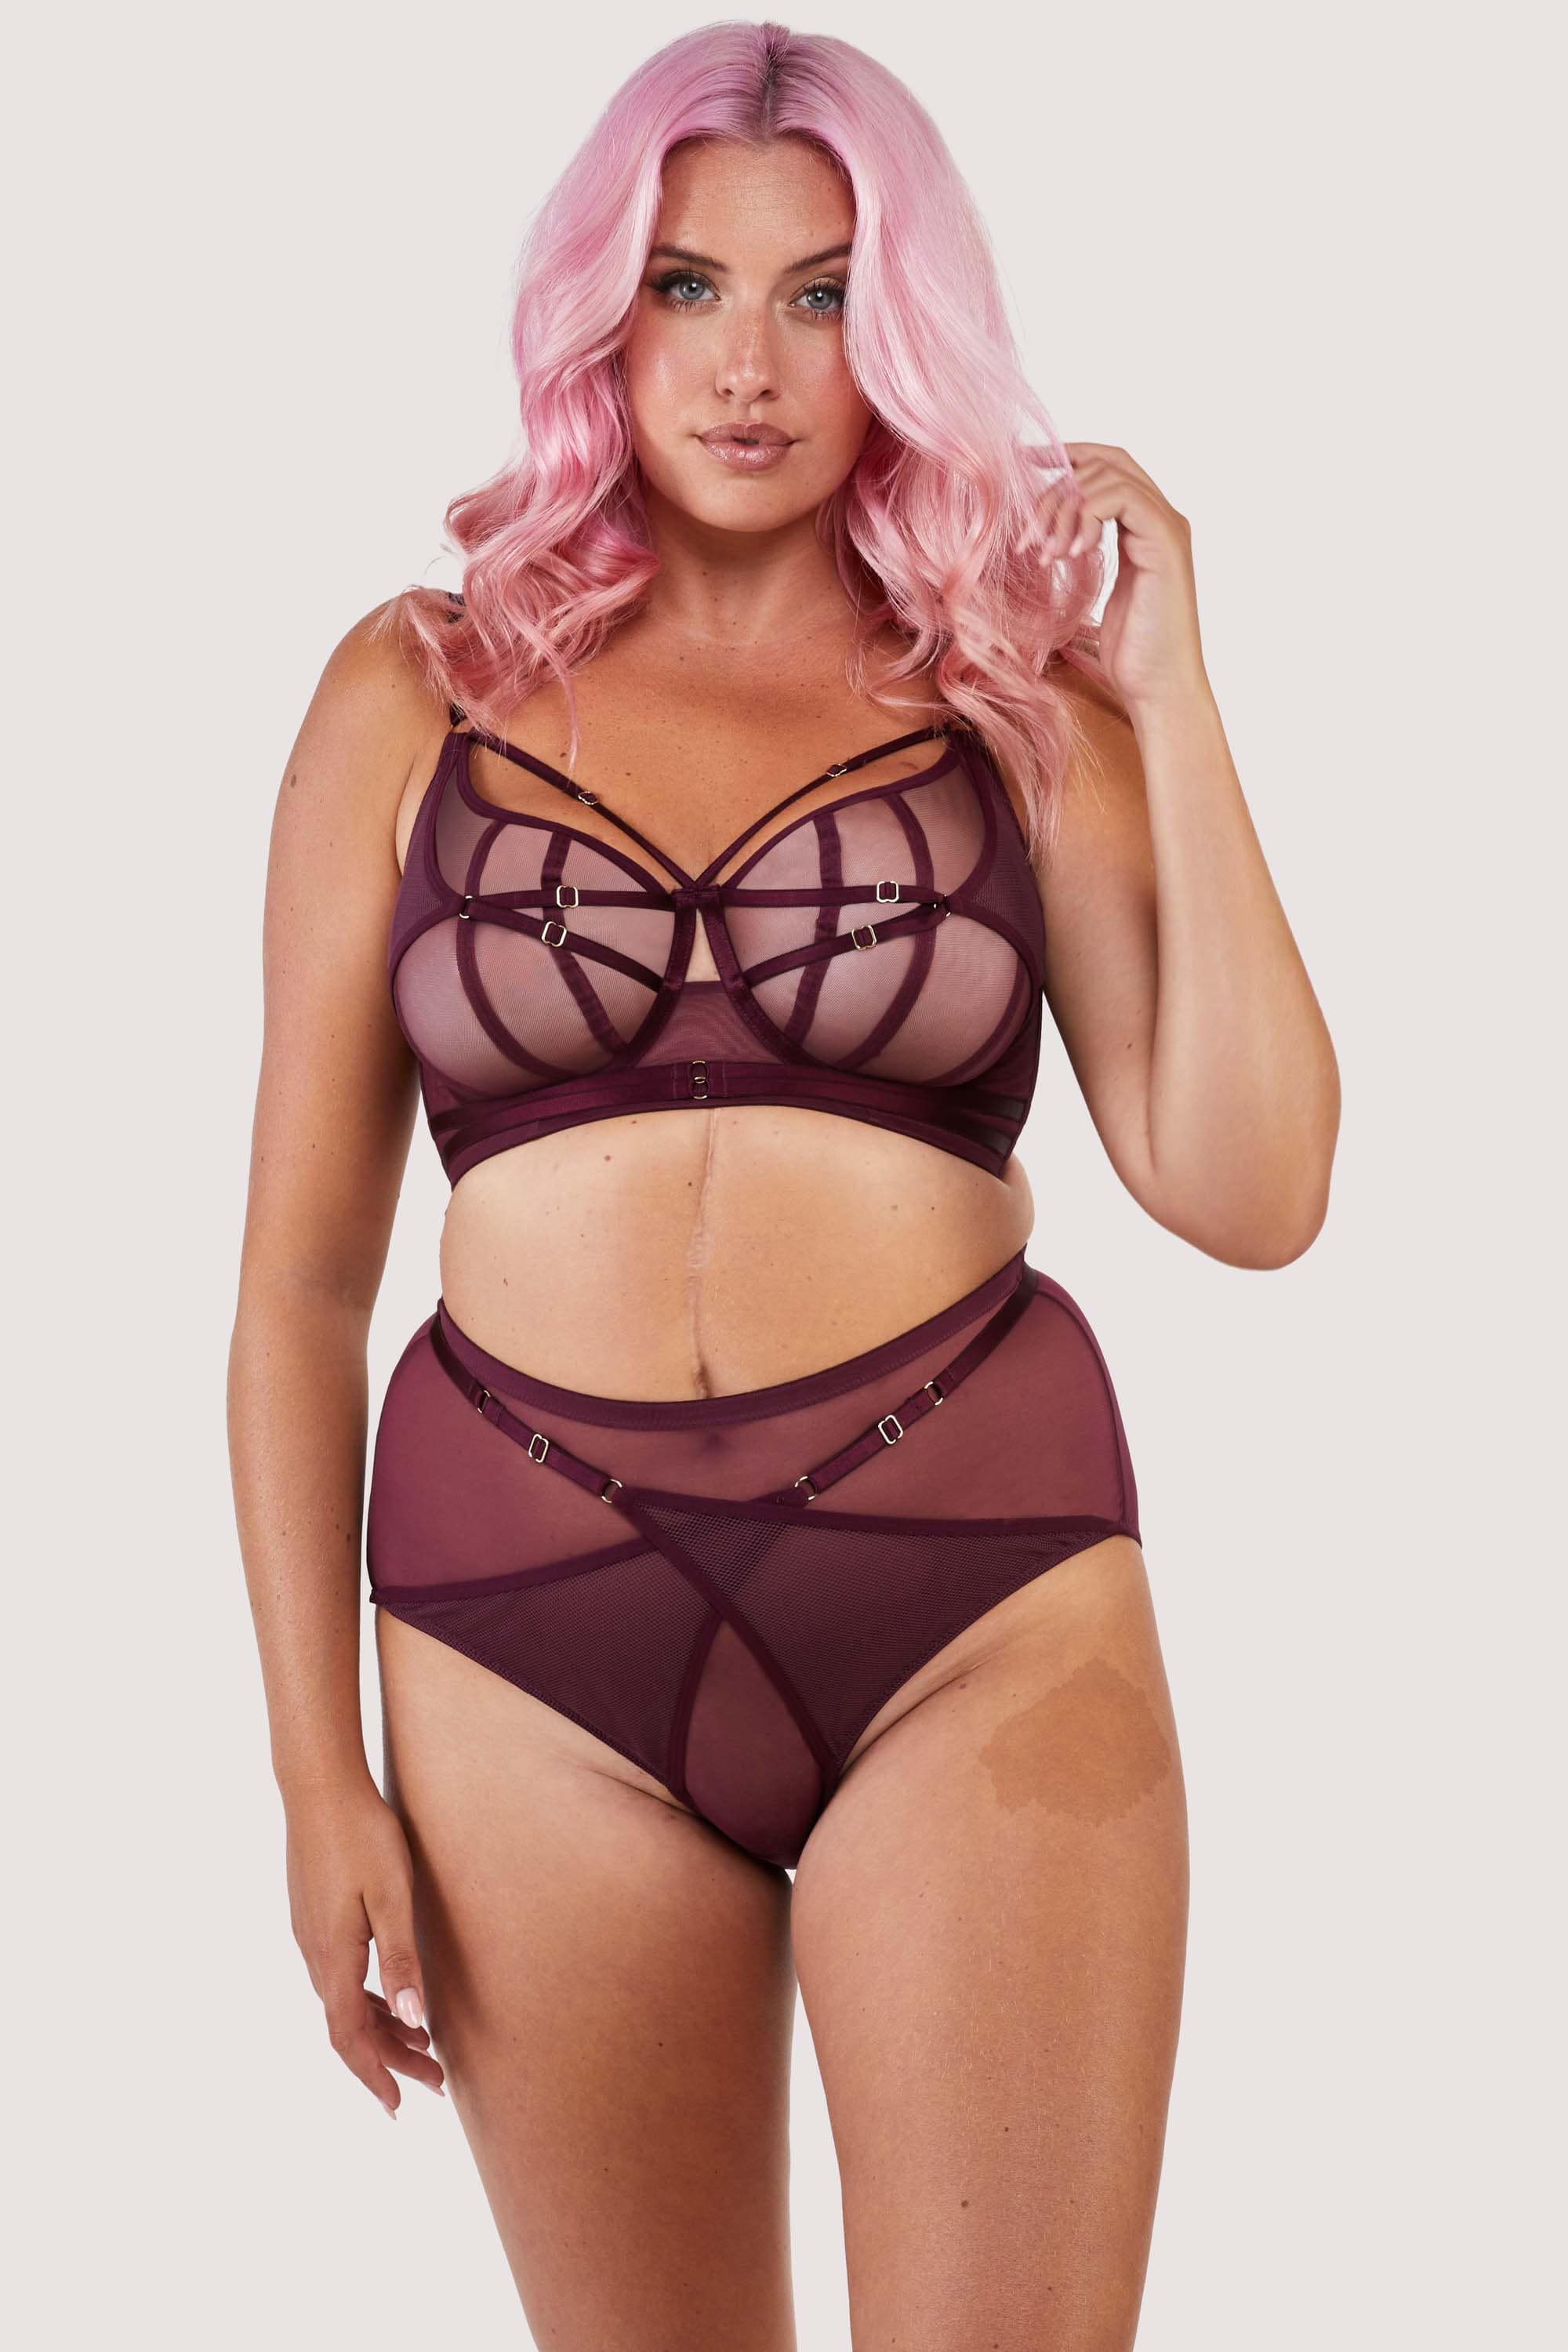 Harness style bra and brief with mesh overlay and visible gold hardware in a deep wine red/purple.